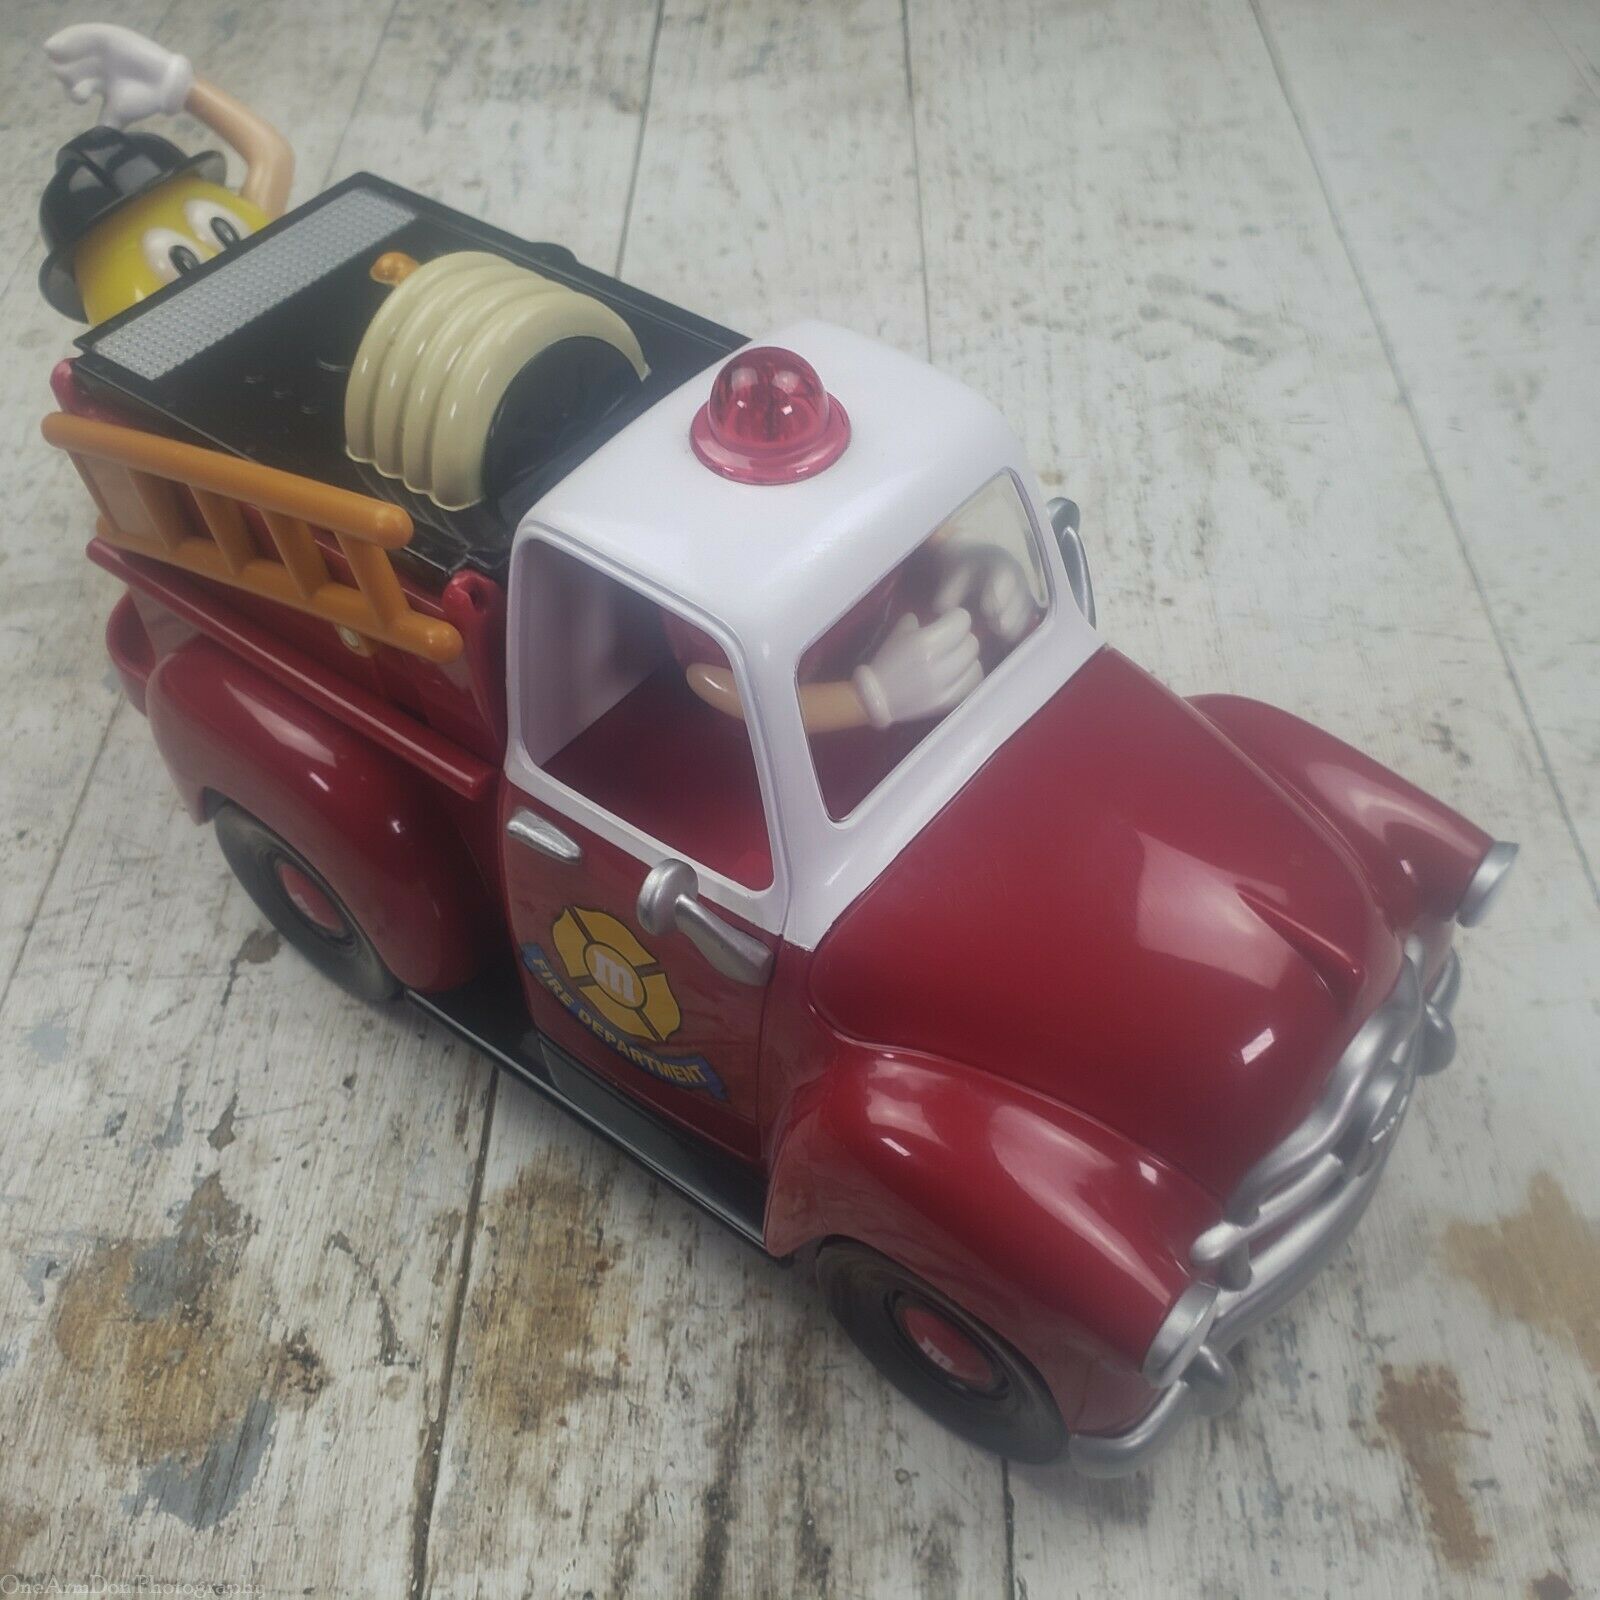 M&M Reds Firehouse Fire Truck Yellow Red Characters Candy Dispenser w box - $22.99